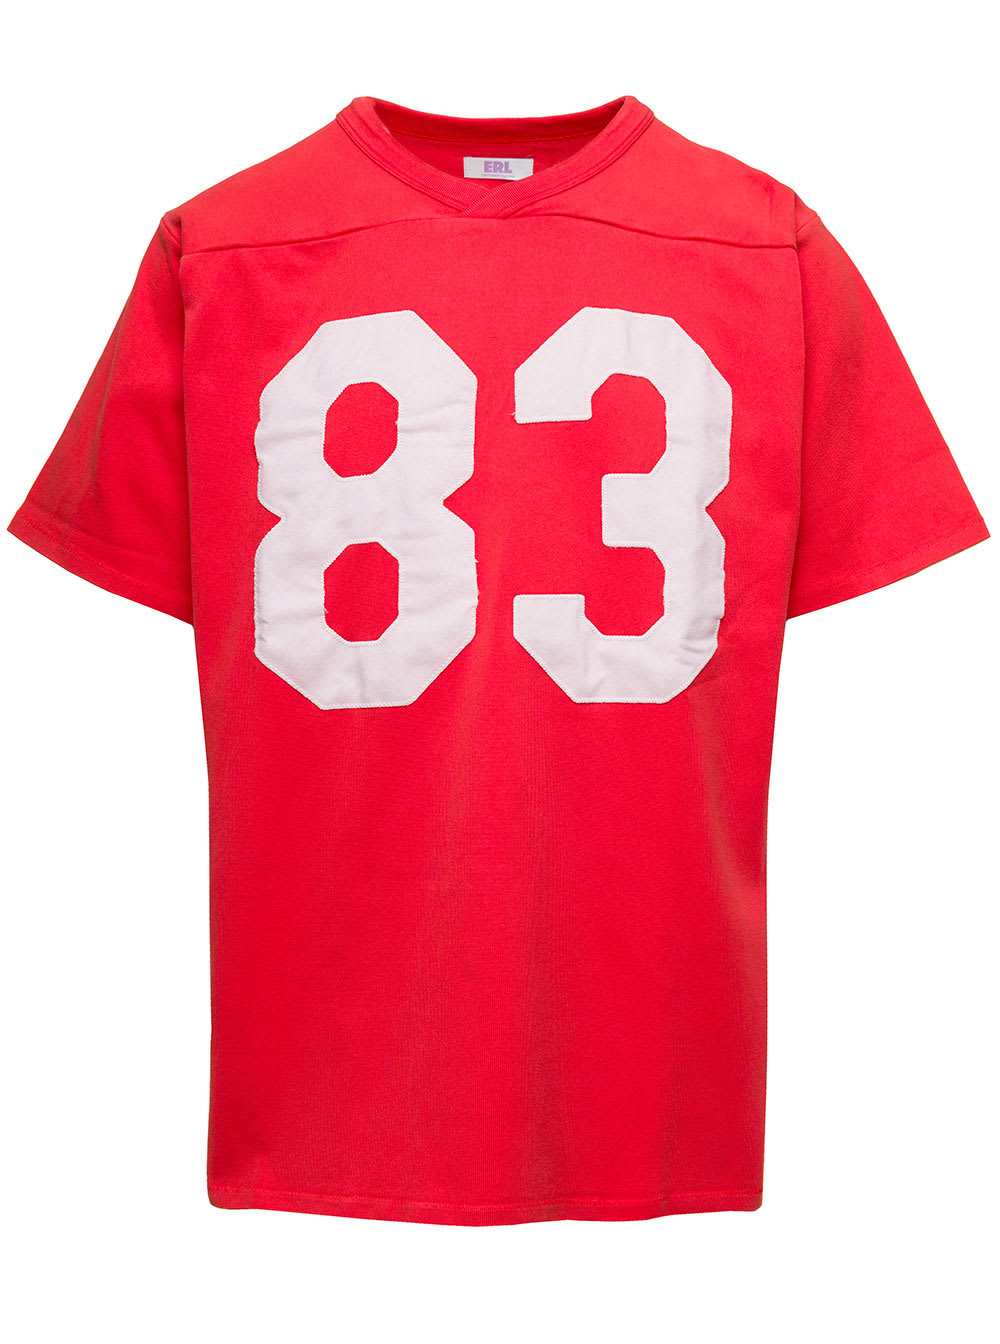 Red Football T-shirt With 83 Print In Cotton